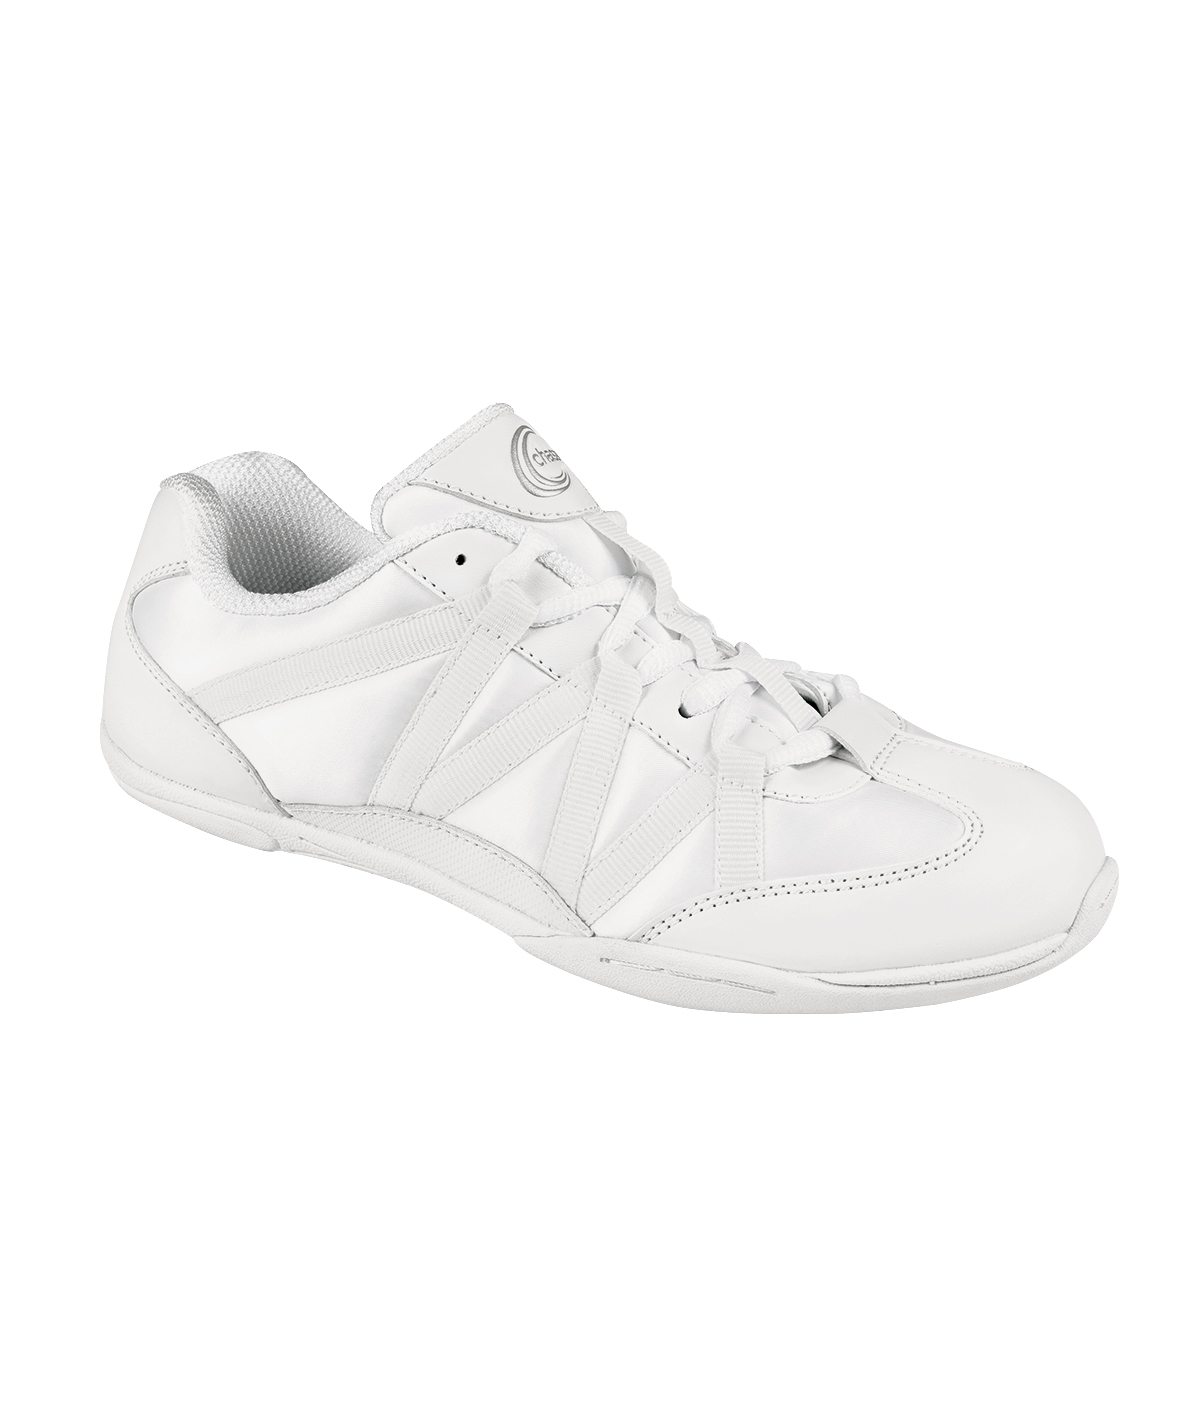 Chassé Cheerleading Shoes: Find Top 